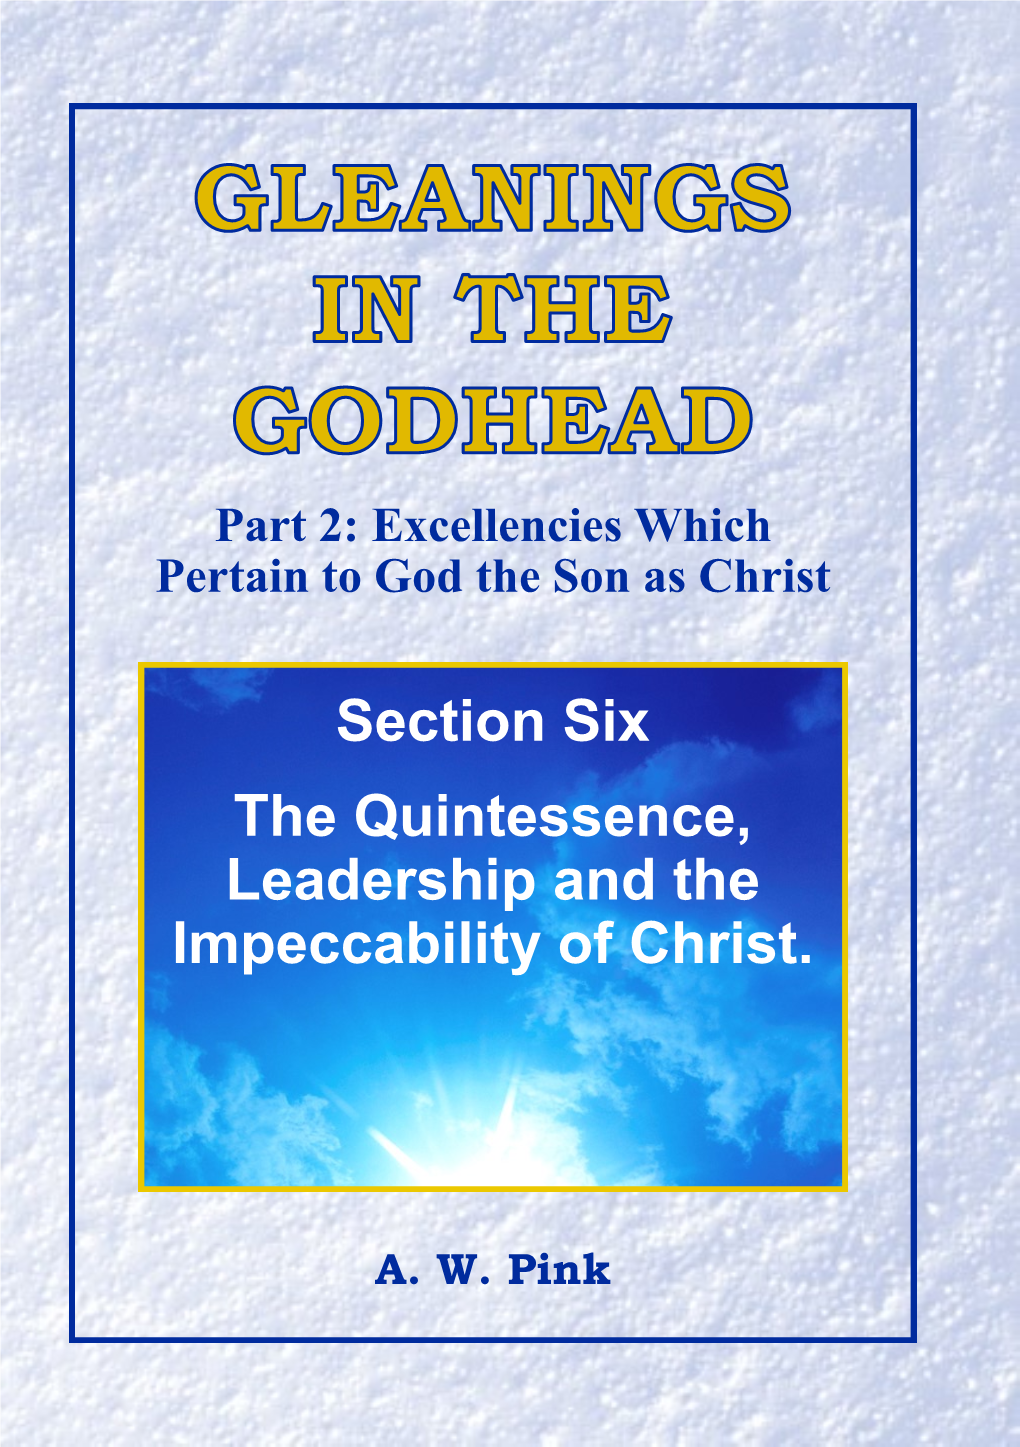 Section Six the Quintessence, Leadership and the Impeccability of Christ